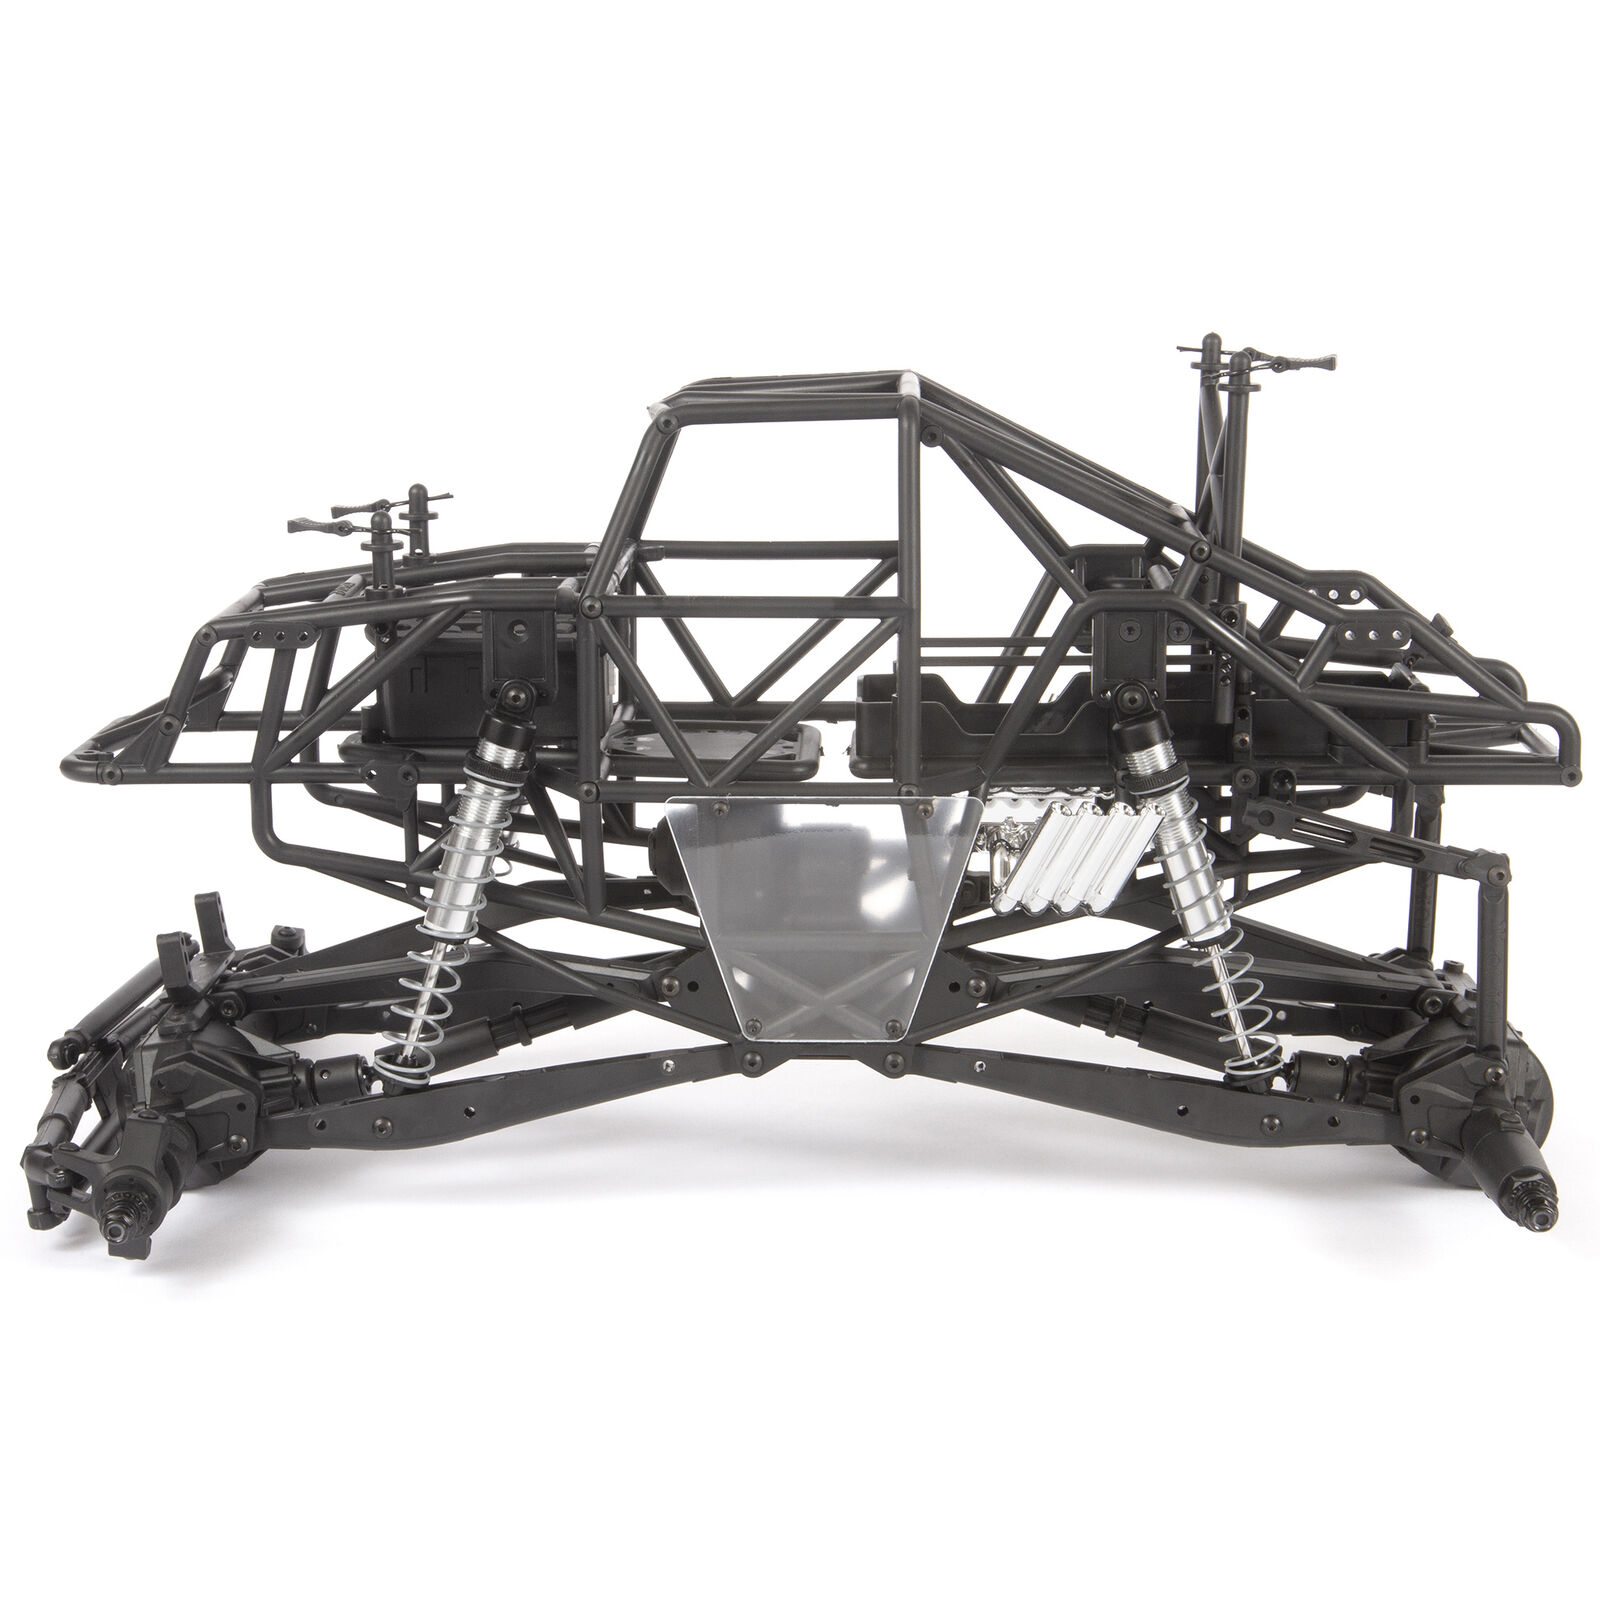 Stock 14" Wheelbase Complete Axial SMT10 Machined Aluminum 4-Link Set 